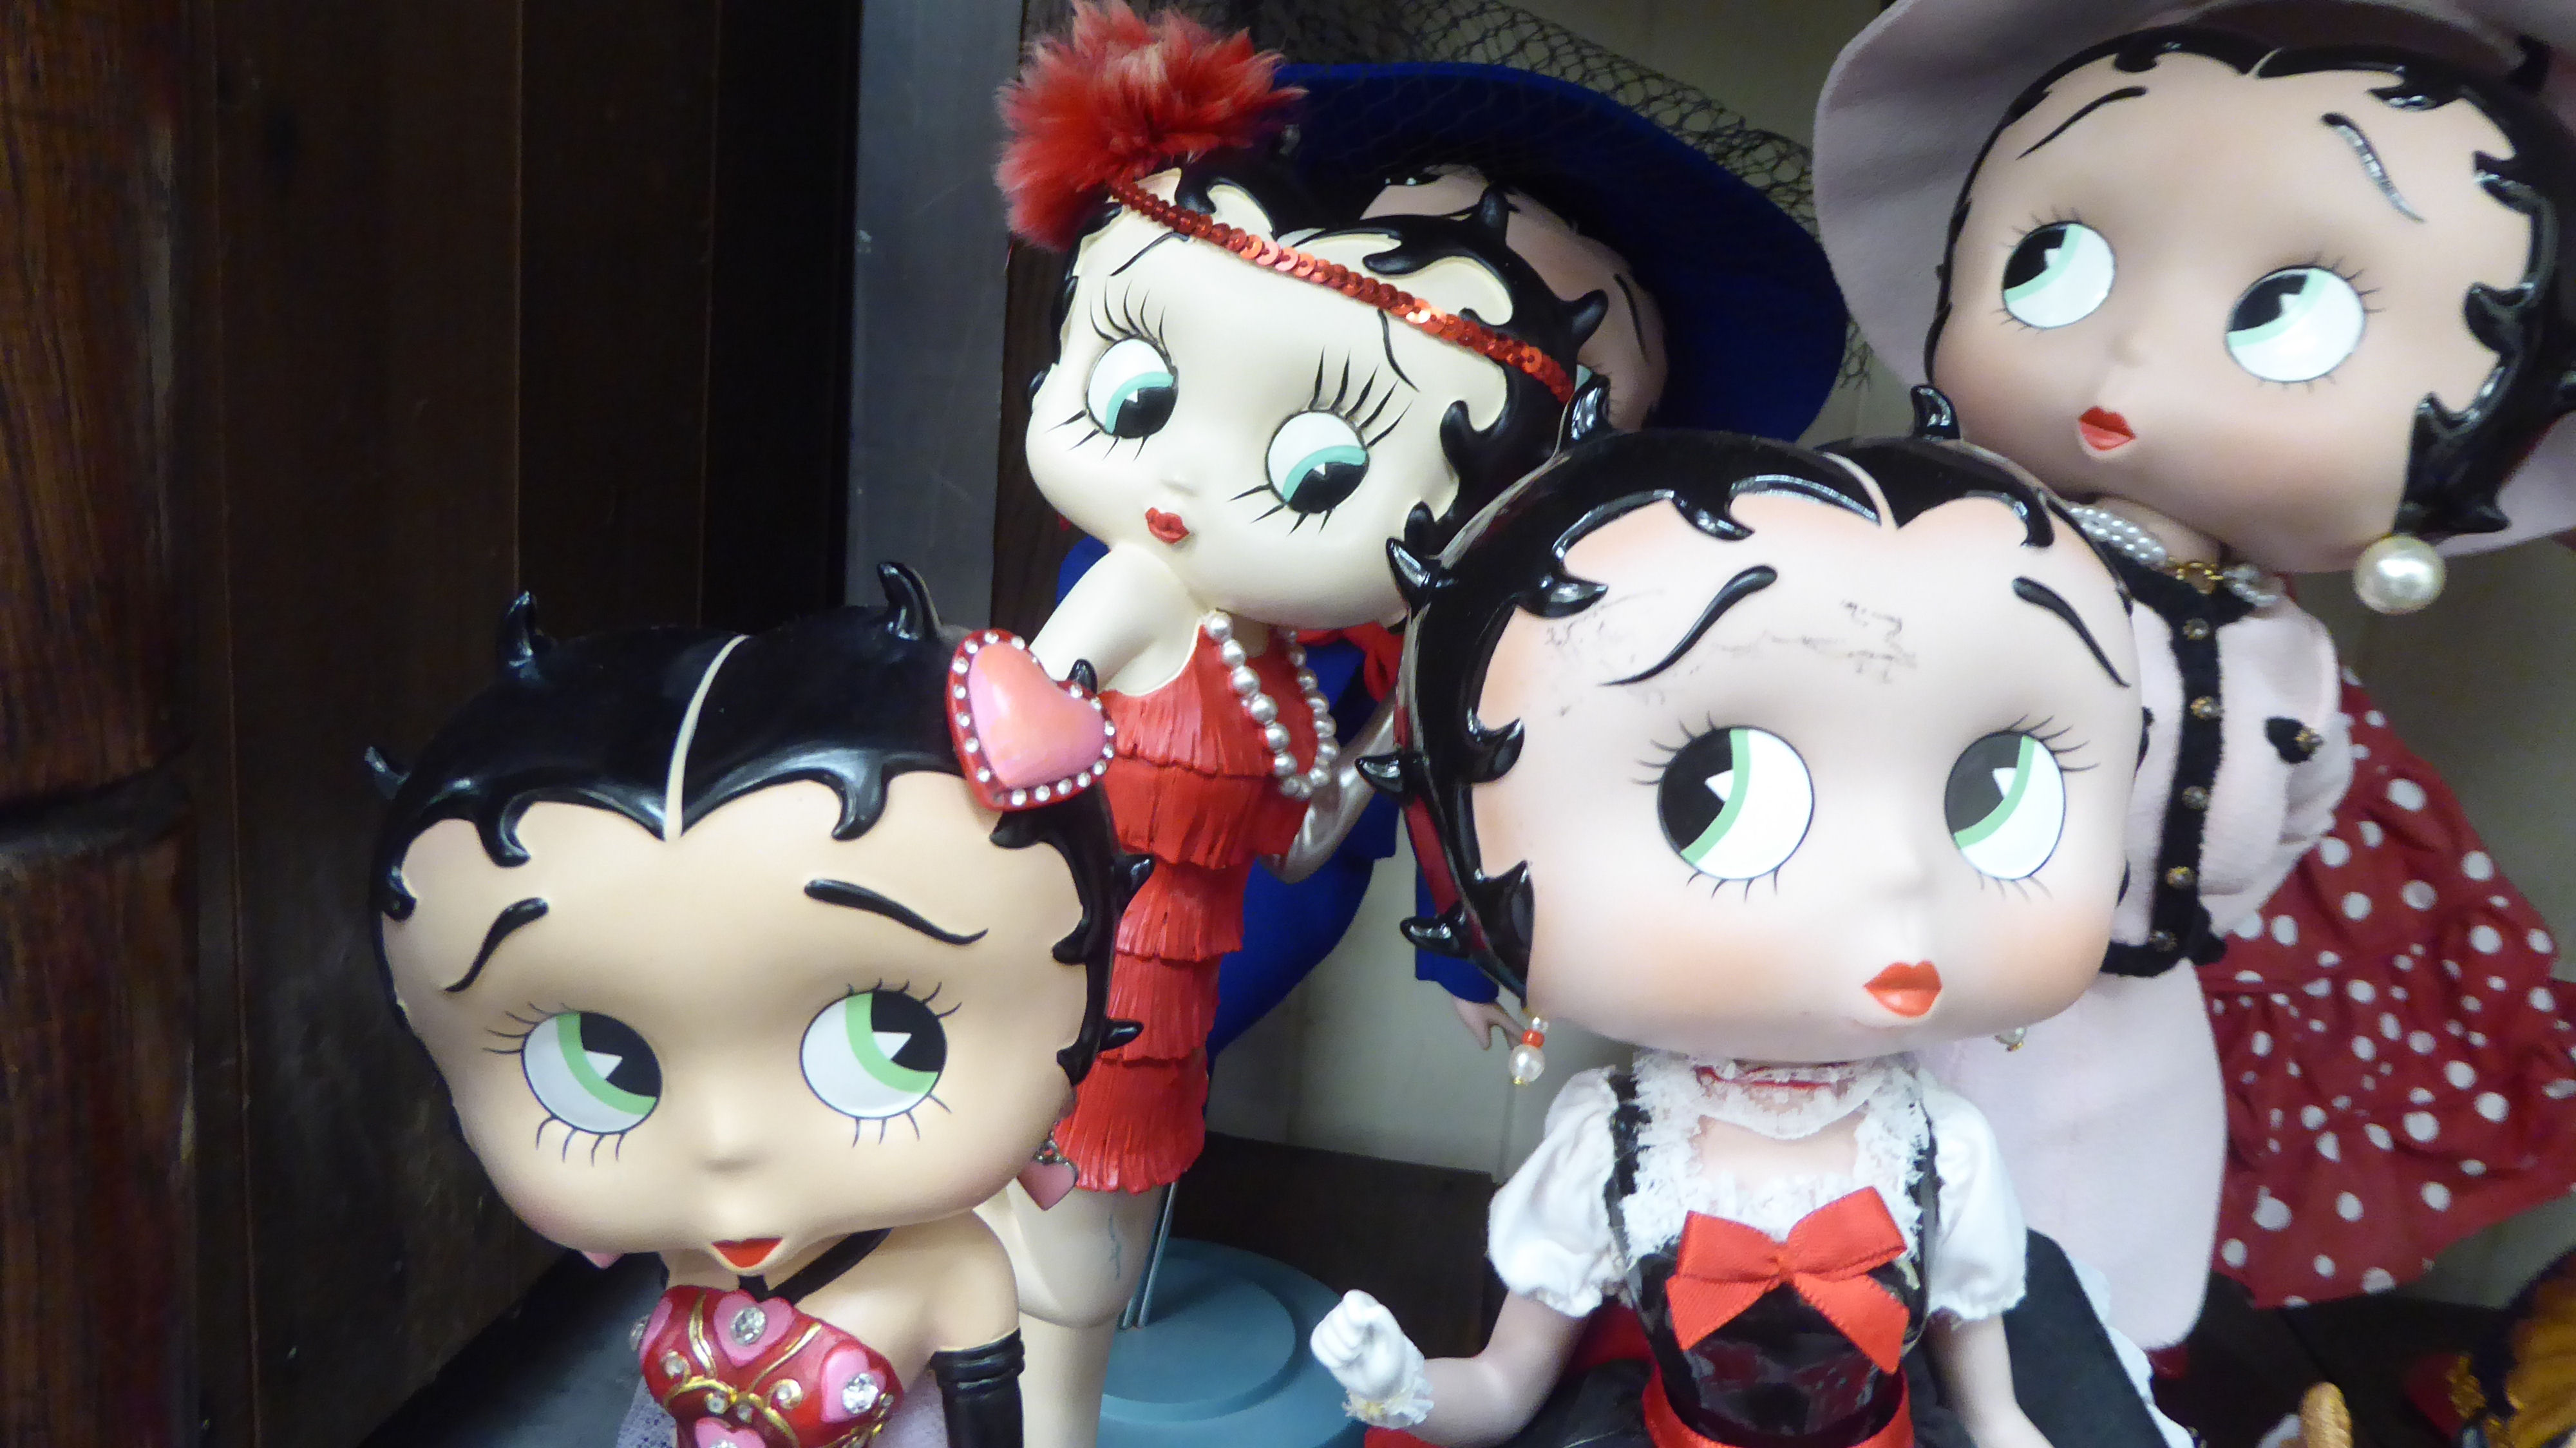 Betty Boop porcelain and composition figures, wearing various costumes  6"-12"h - Image 2 of 6